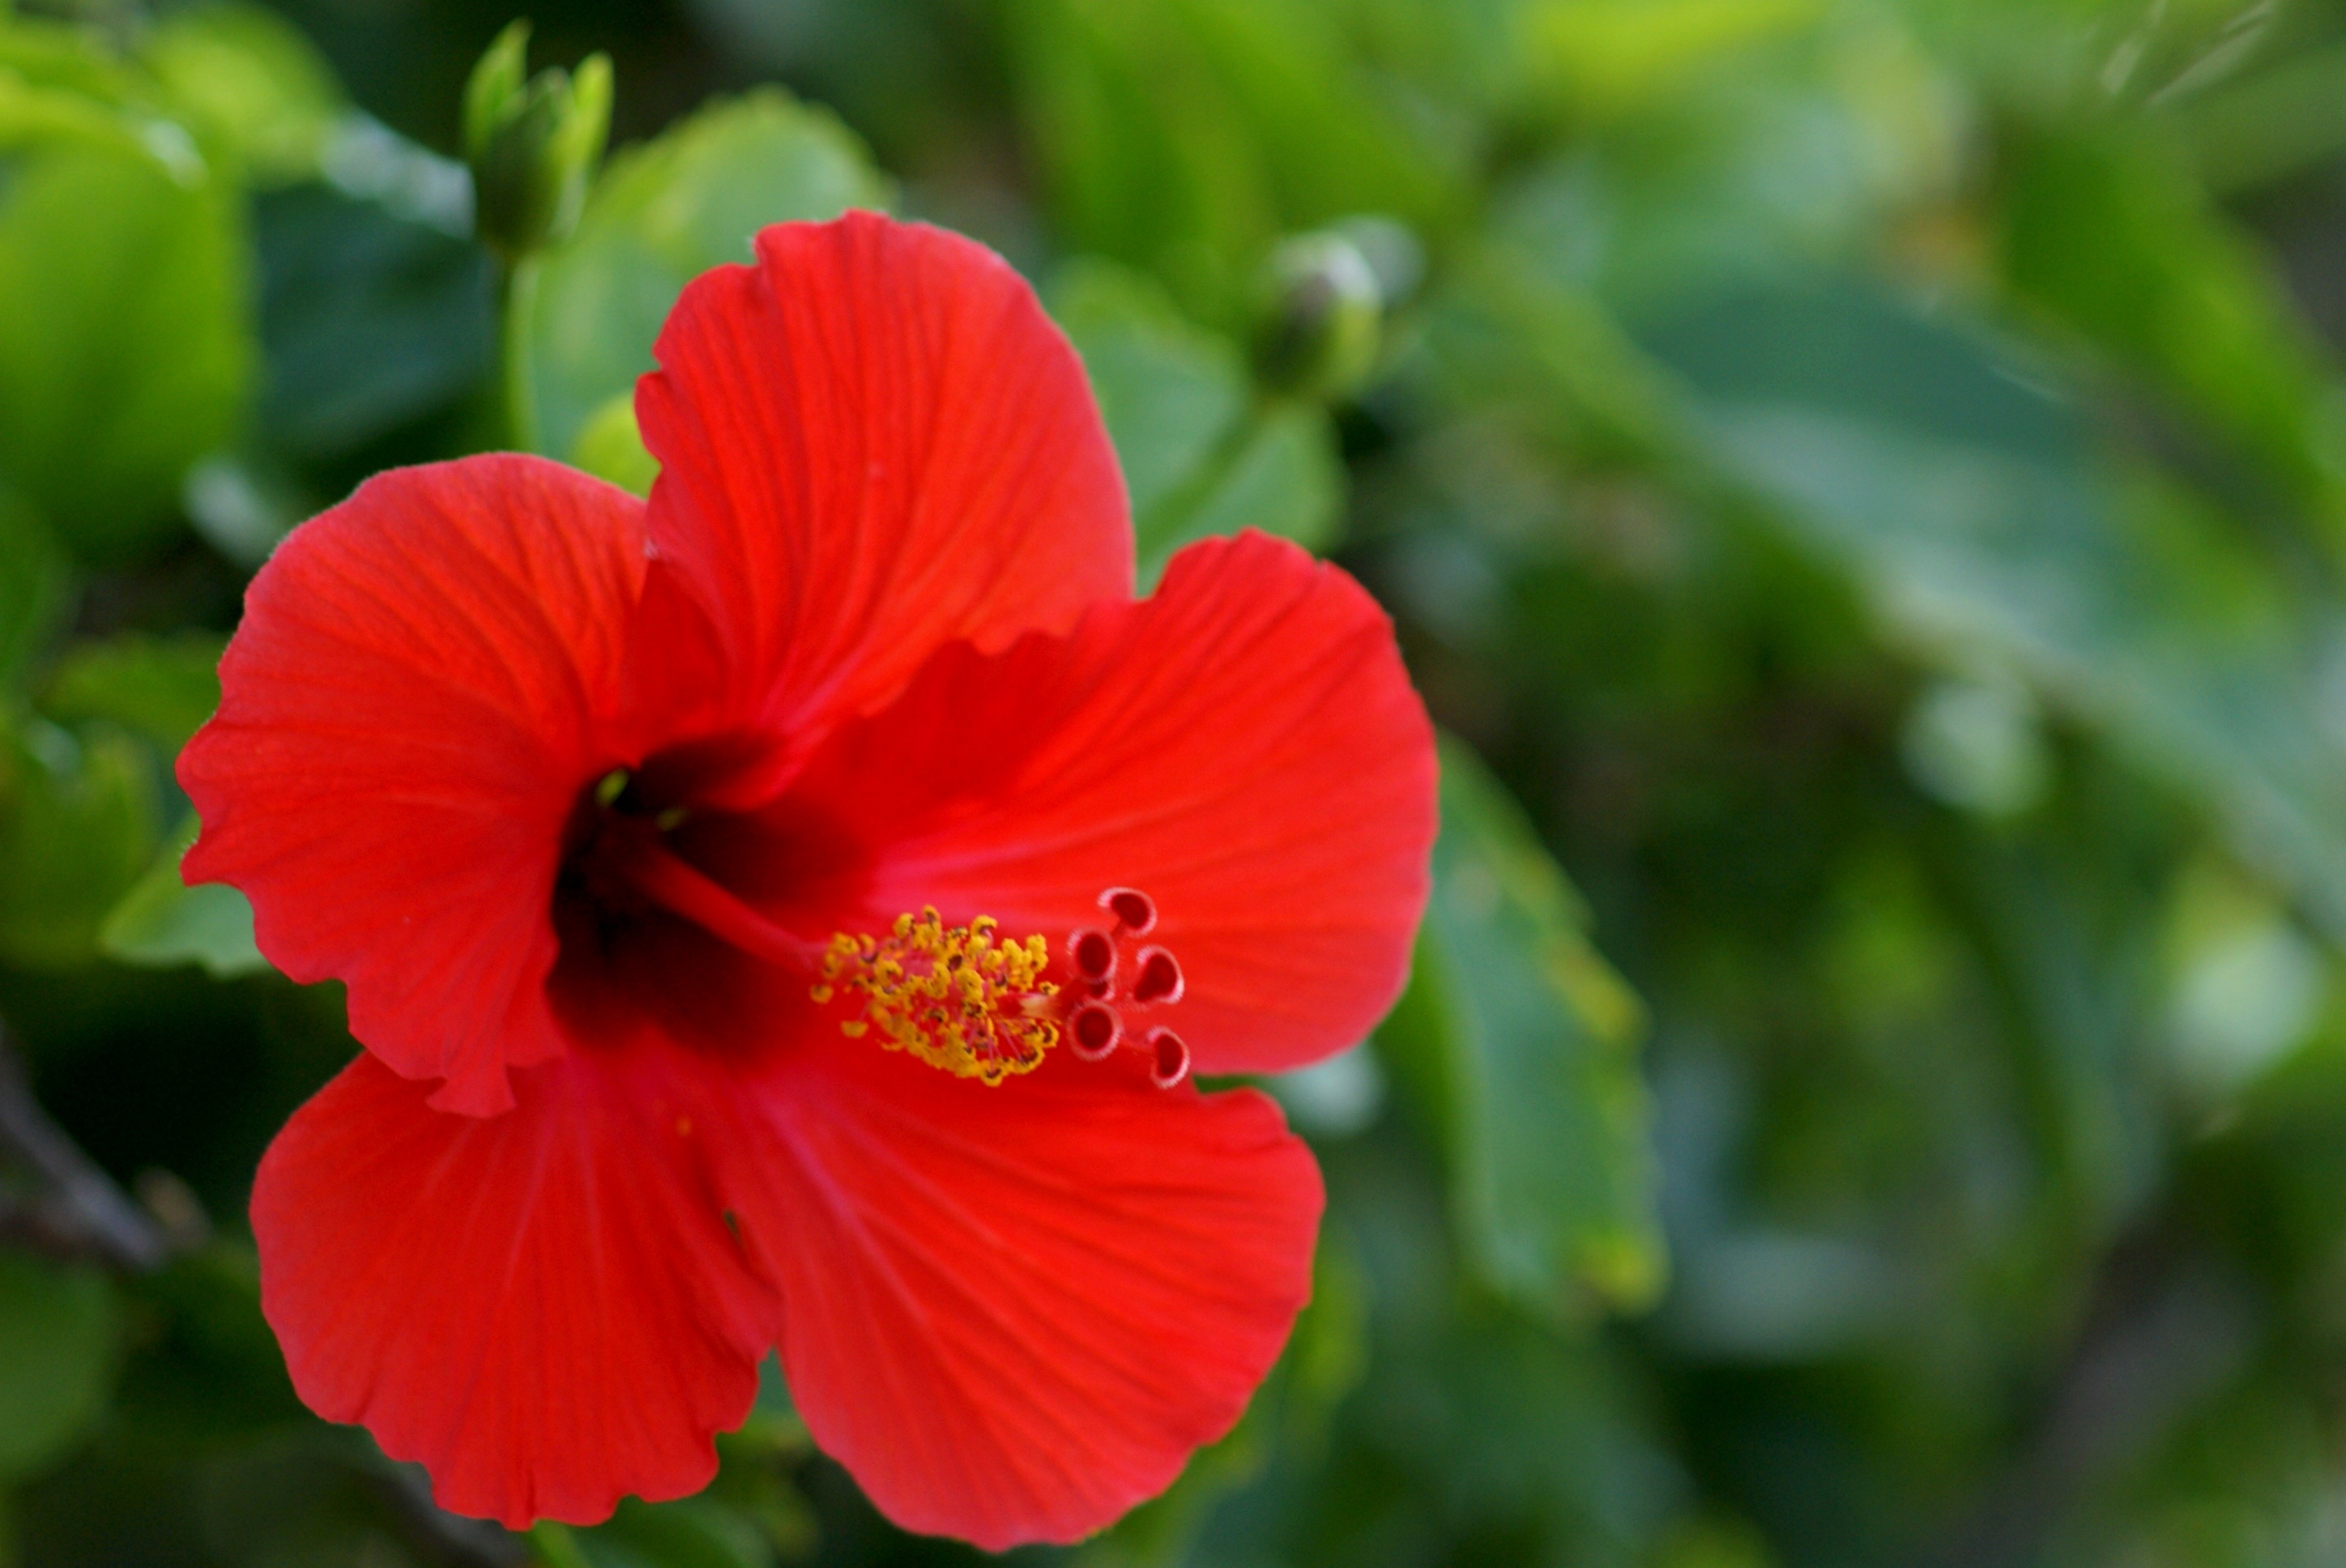 Blooming hibiscus, Foliage leaves, Nature photography, Beautiful flowers, 2900x1940 HD Desktop